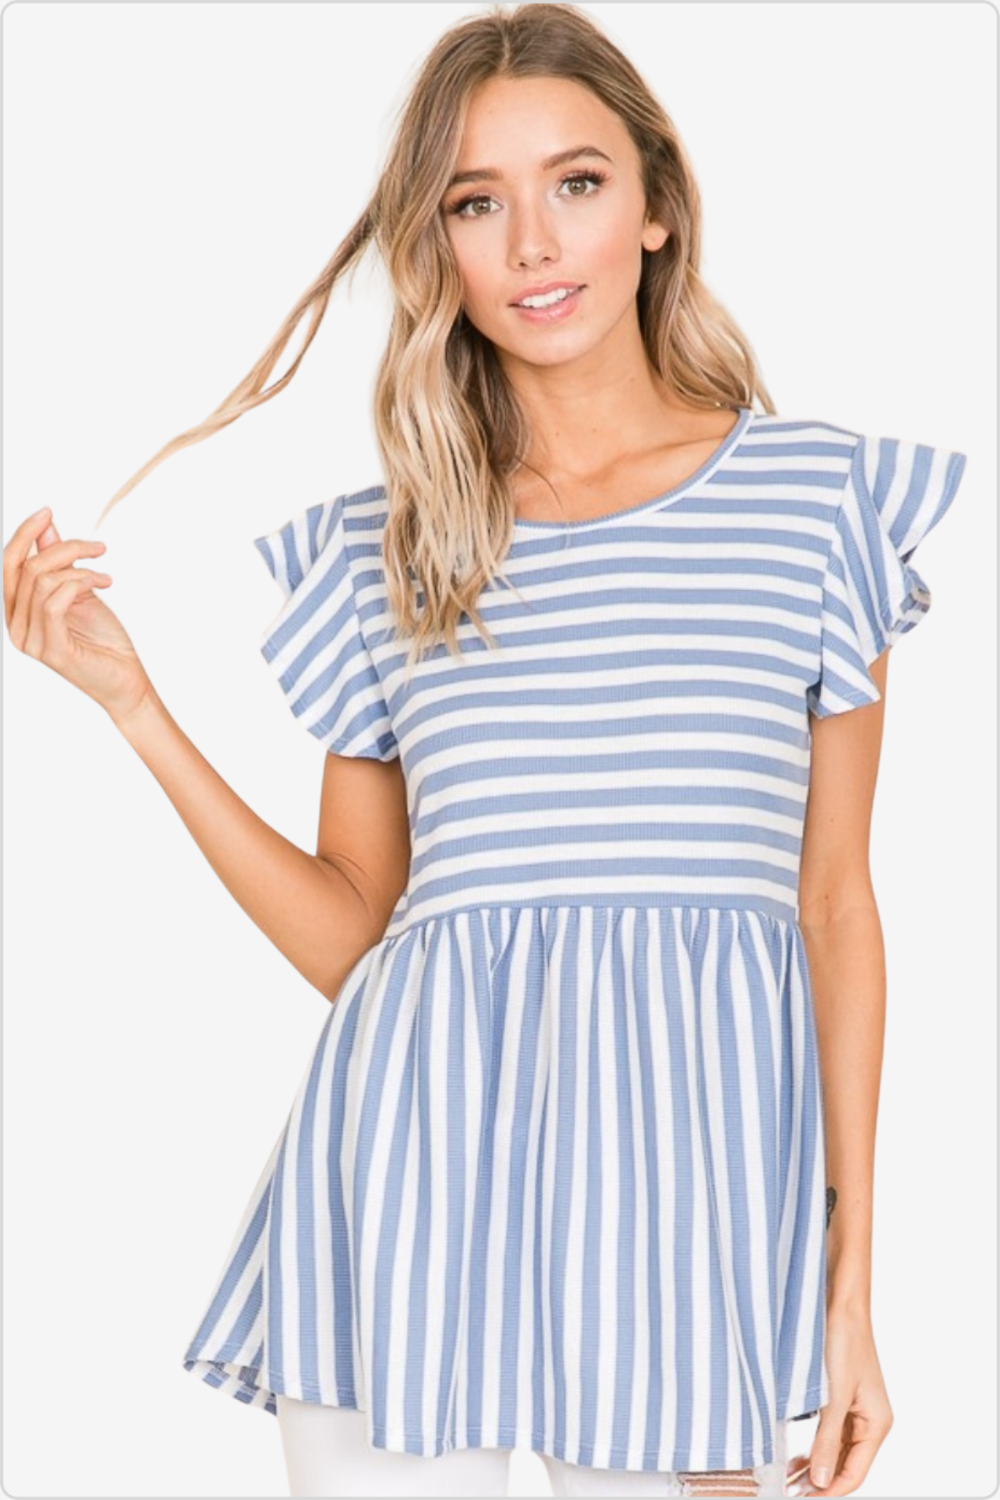 Woman in blue striped flutter sleeve top and white jeans for a fresh summer look.